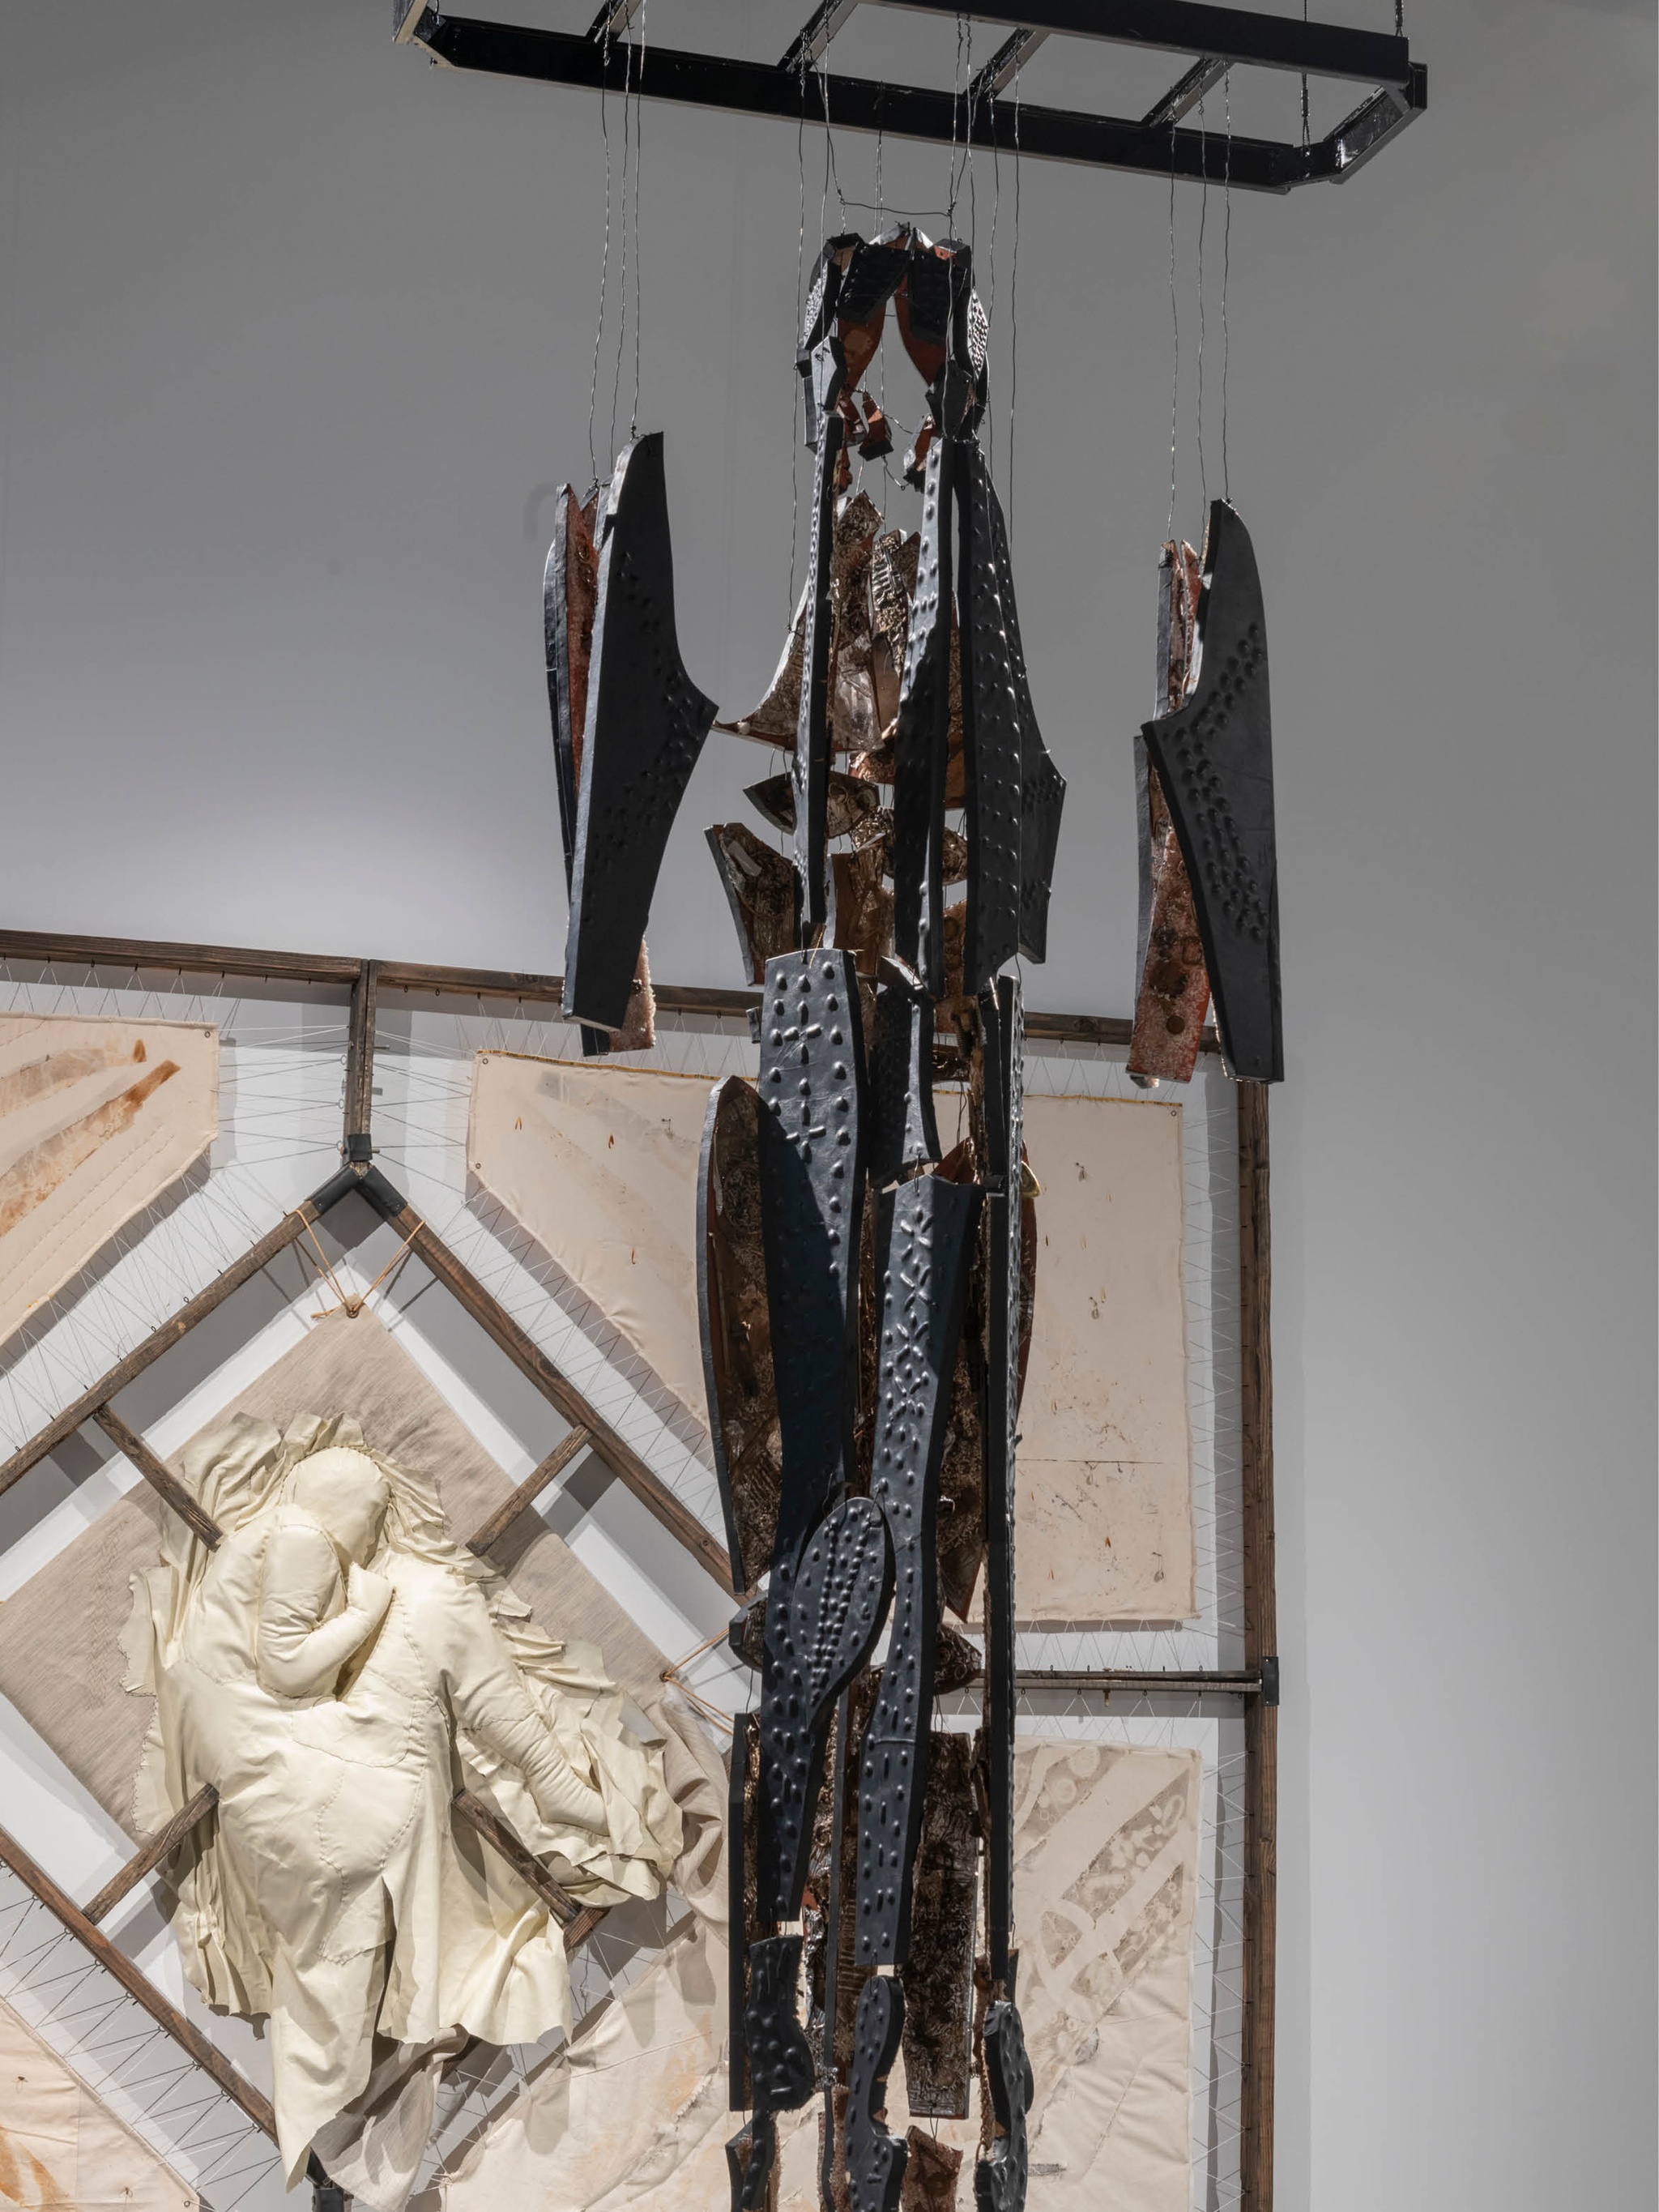 An installation of five artworks in a gallery. They are placed on the ground, hanging from a wall in the background, or hanging from the ceiling. The works on the ground include a box with leather scraps piled inside, a white piece of leather dropped on the floor, and a clothing rack similar to a coat rack. On the wall, a tapestry is stretched on a metal frame. At its center a human figure is formed out of white leather that has been stuffed. The figure is in the fetal position. Hanging at the center of these works is a pattern of the artist's body that has been cut out of black leather and affixed to shaped wood panels. The individual parts are attached by wires similar to a skeleton. 